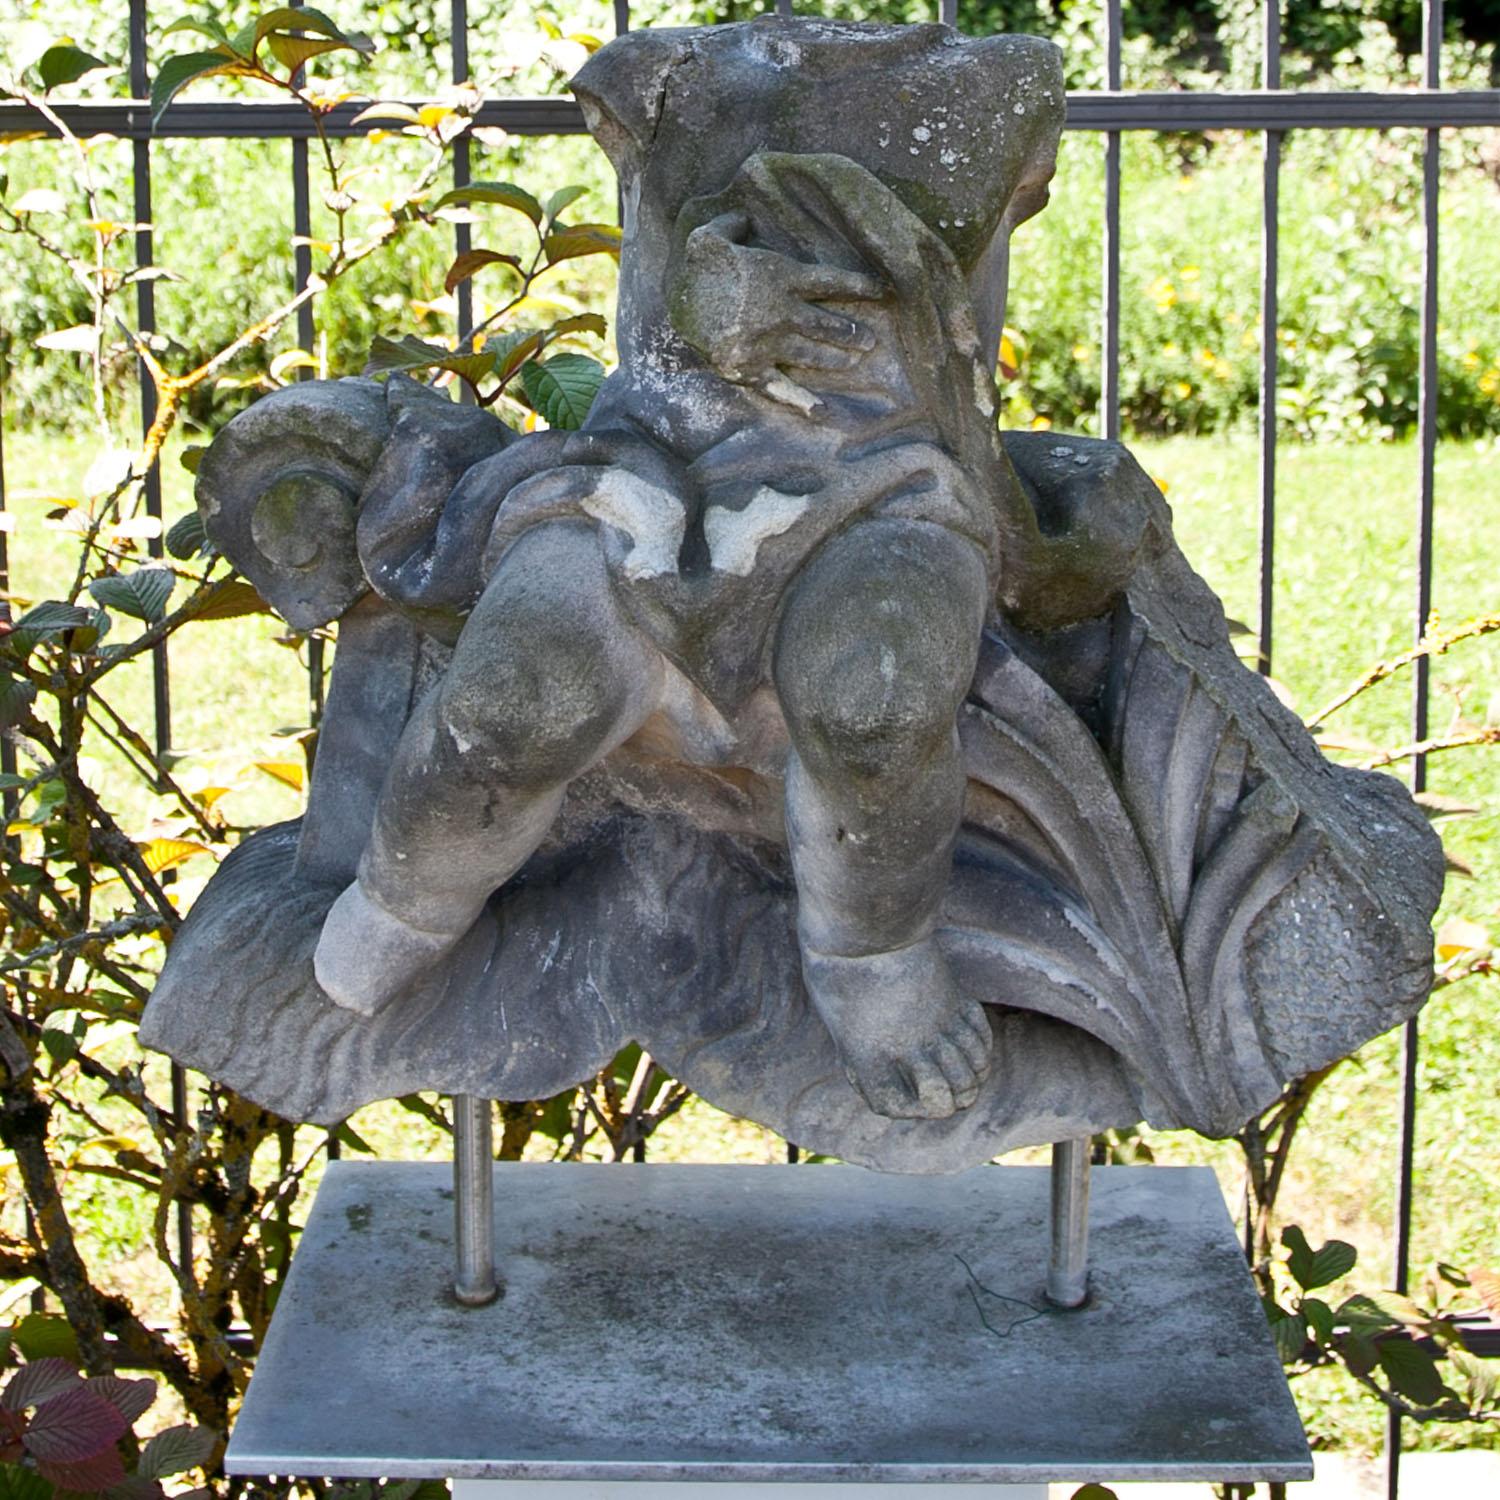 Baroque sandstone fragment of a putto sitting on a rocaille ornament with waves and leaves. The head, arms and parts of the ornament are missing. Very beautiful and naturally aged patina. The sculpture is mounted on a metal frame.